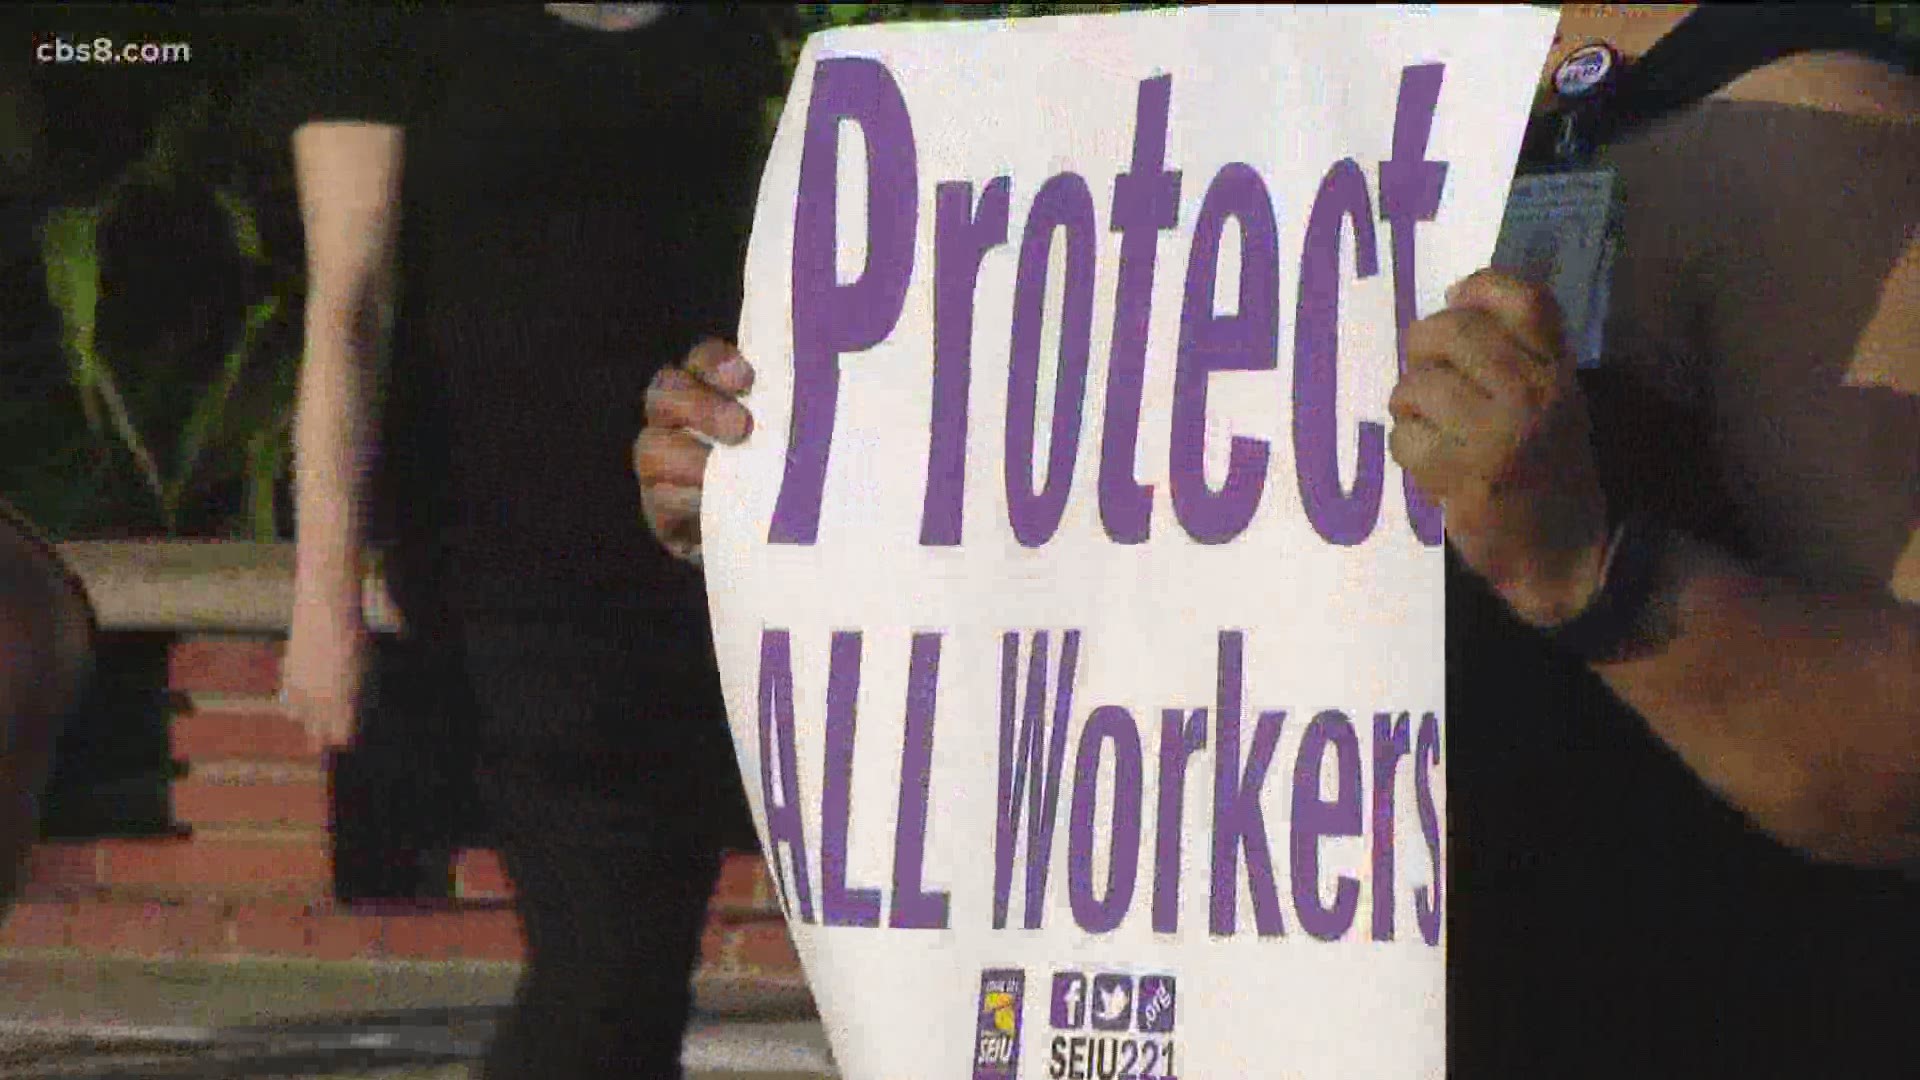 The union representing the social worker, SEIU Local 221, is calling for PPE, hazard pay and more staff to fight COVID-19